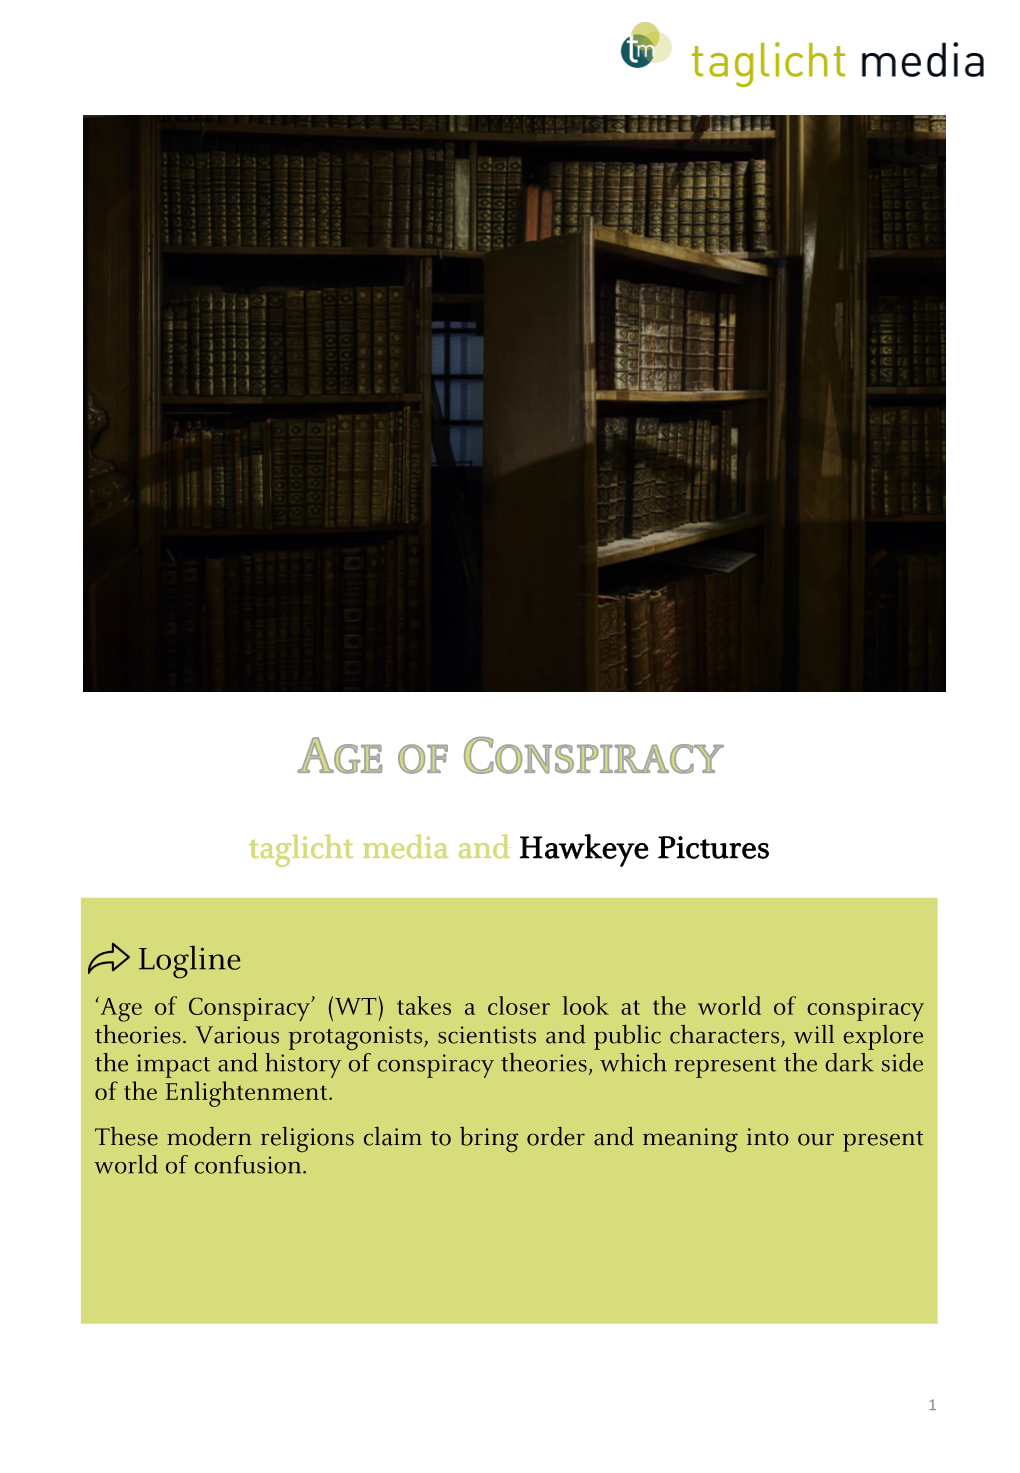 Logline ‘Age of Conspiracy’ (WT) Takes a Closer Look at the World of Conspiracy Theories